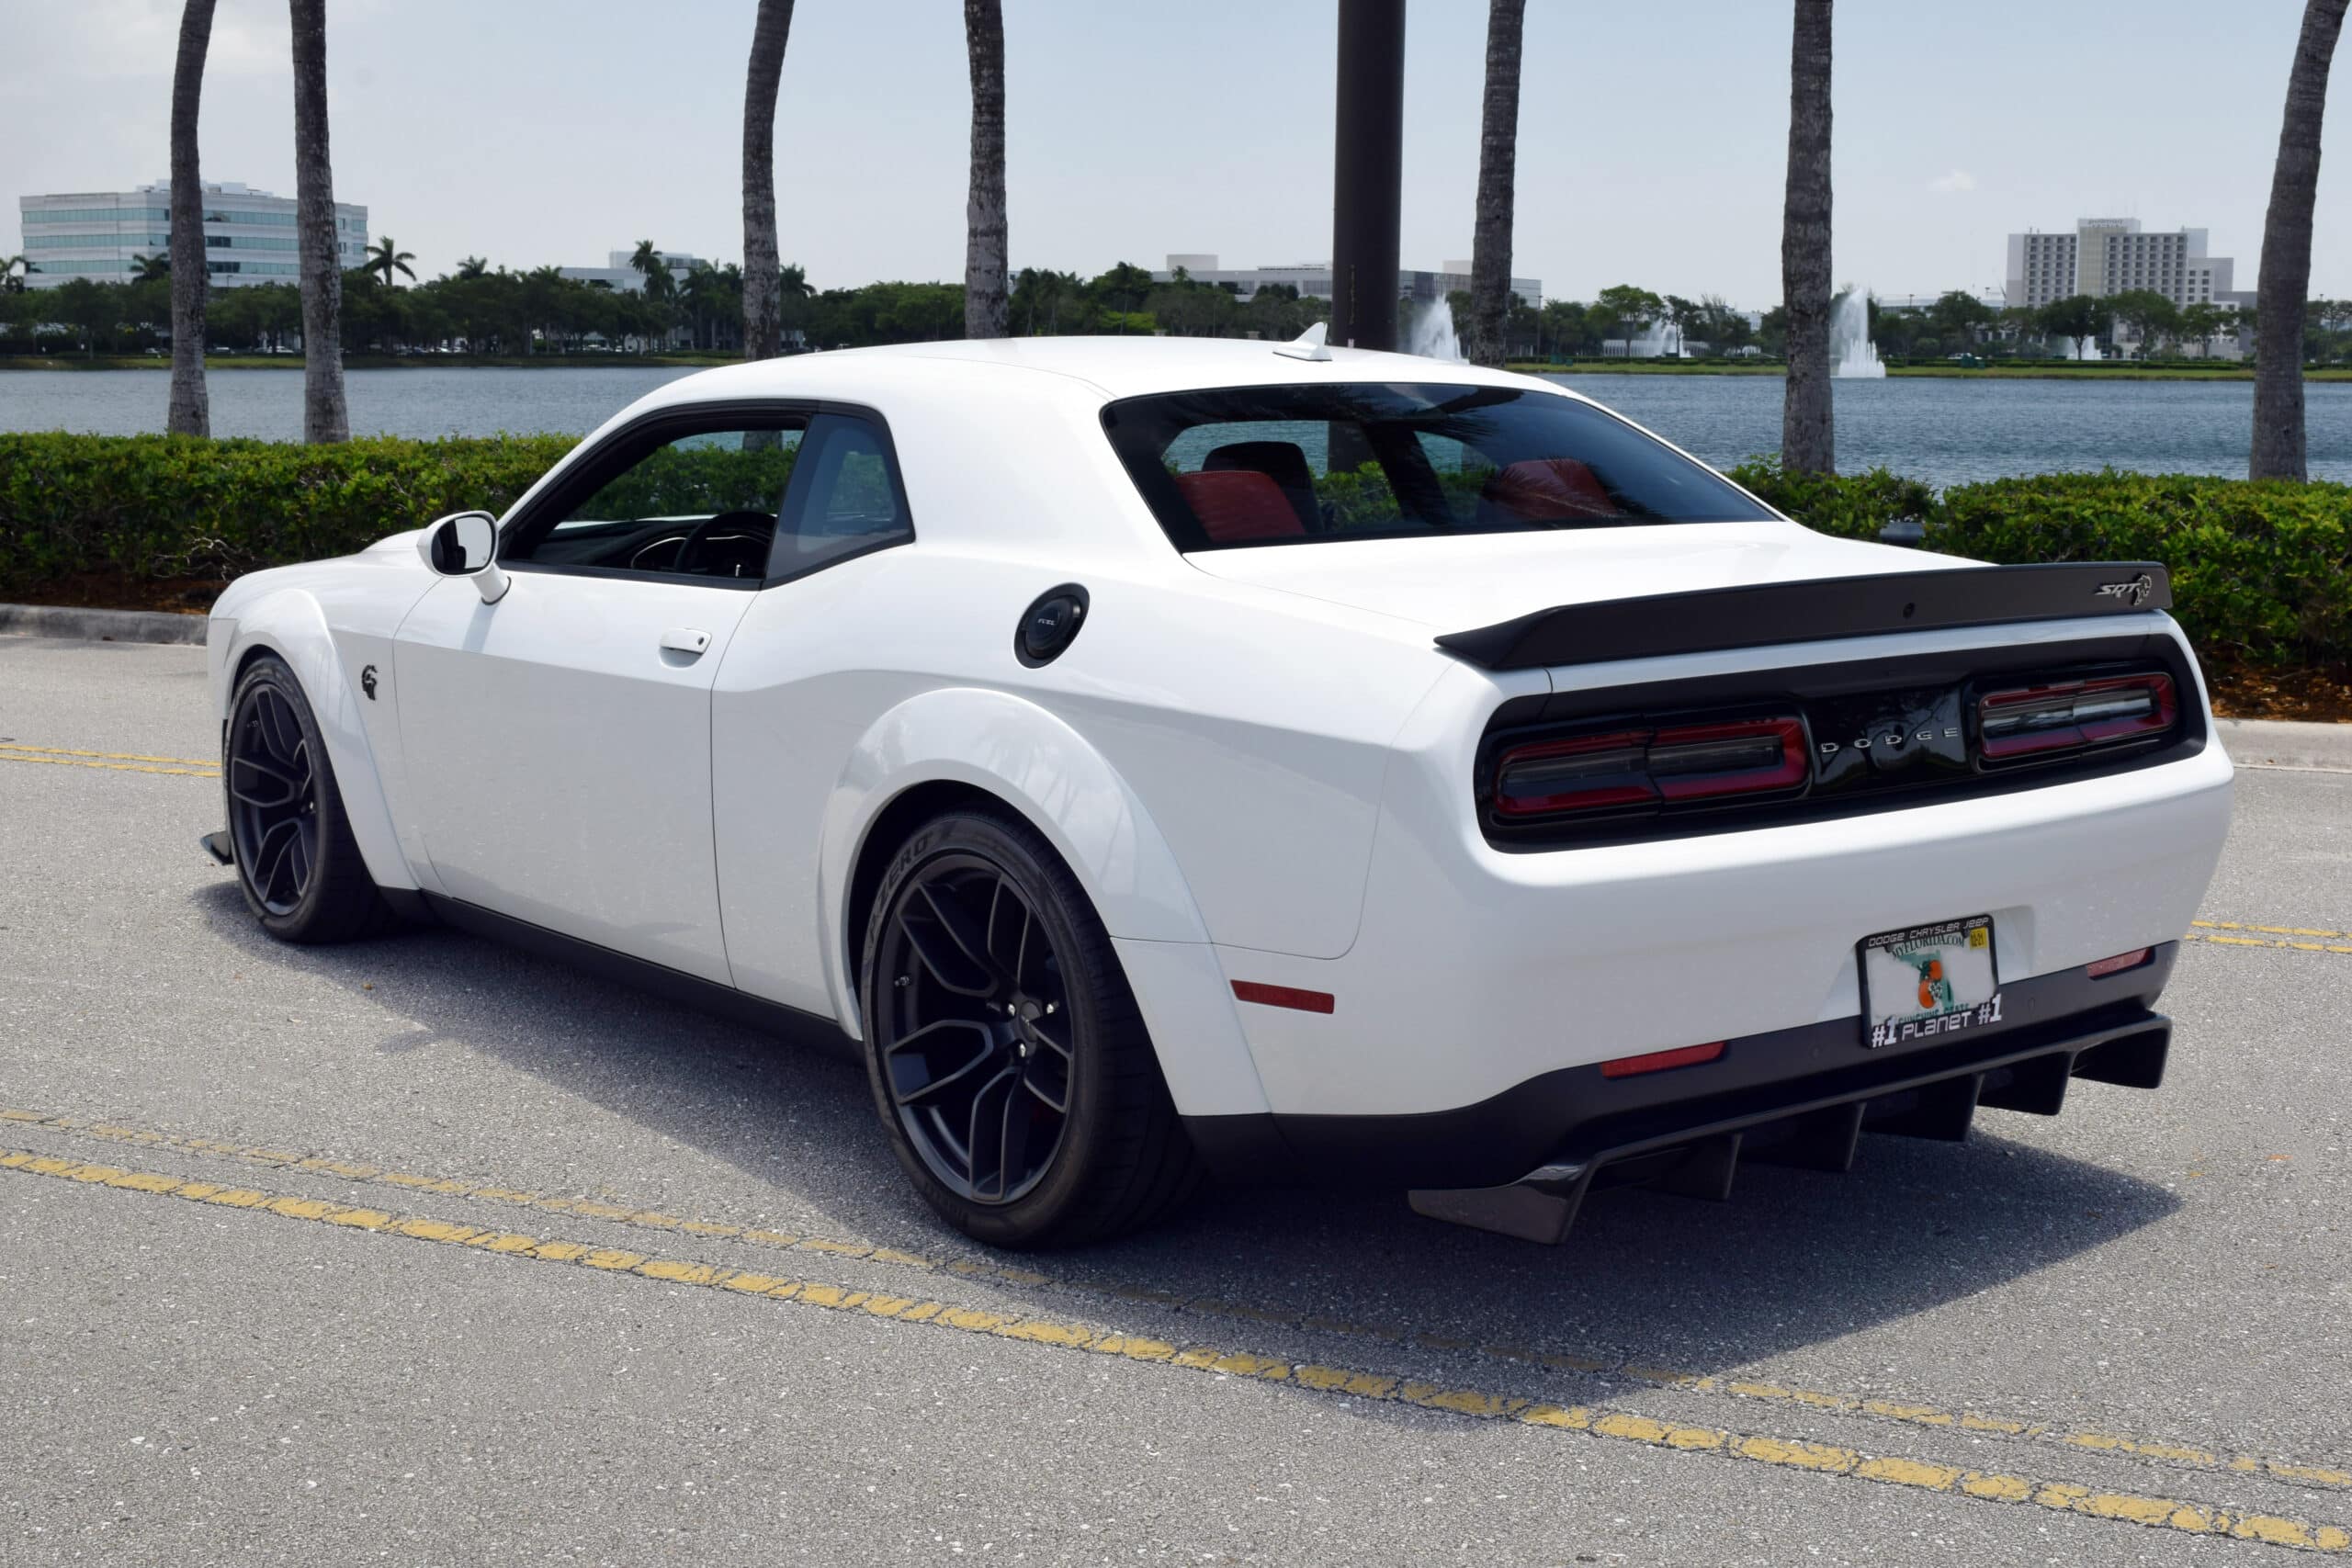 2019 Dodge Challenger Hellcat Redeye   766 miles, One owner, Wide Body, Loaded with options, Original Window Sticker and Factory Warranty